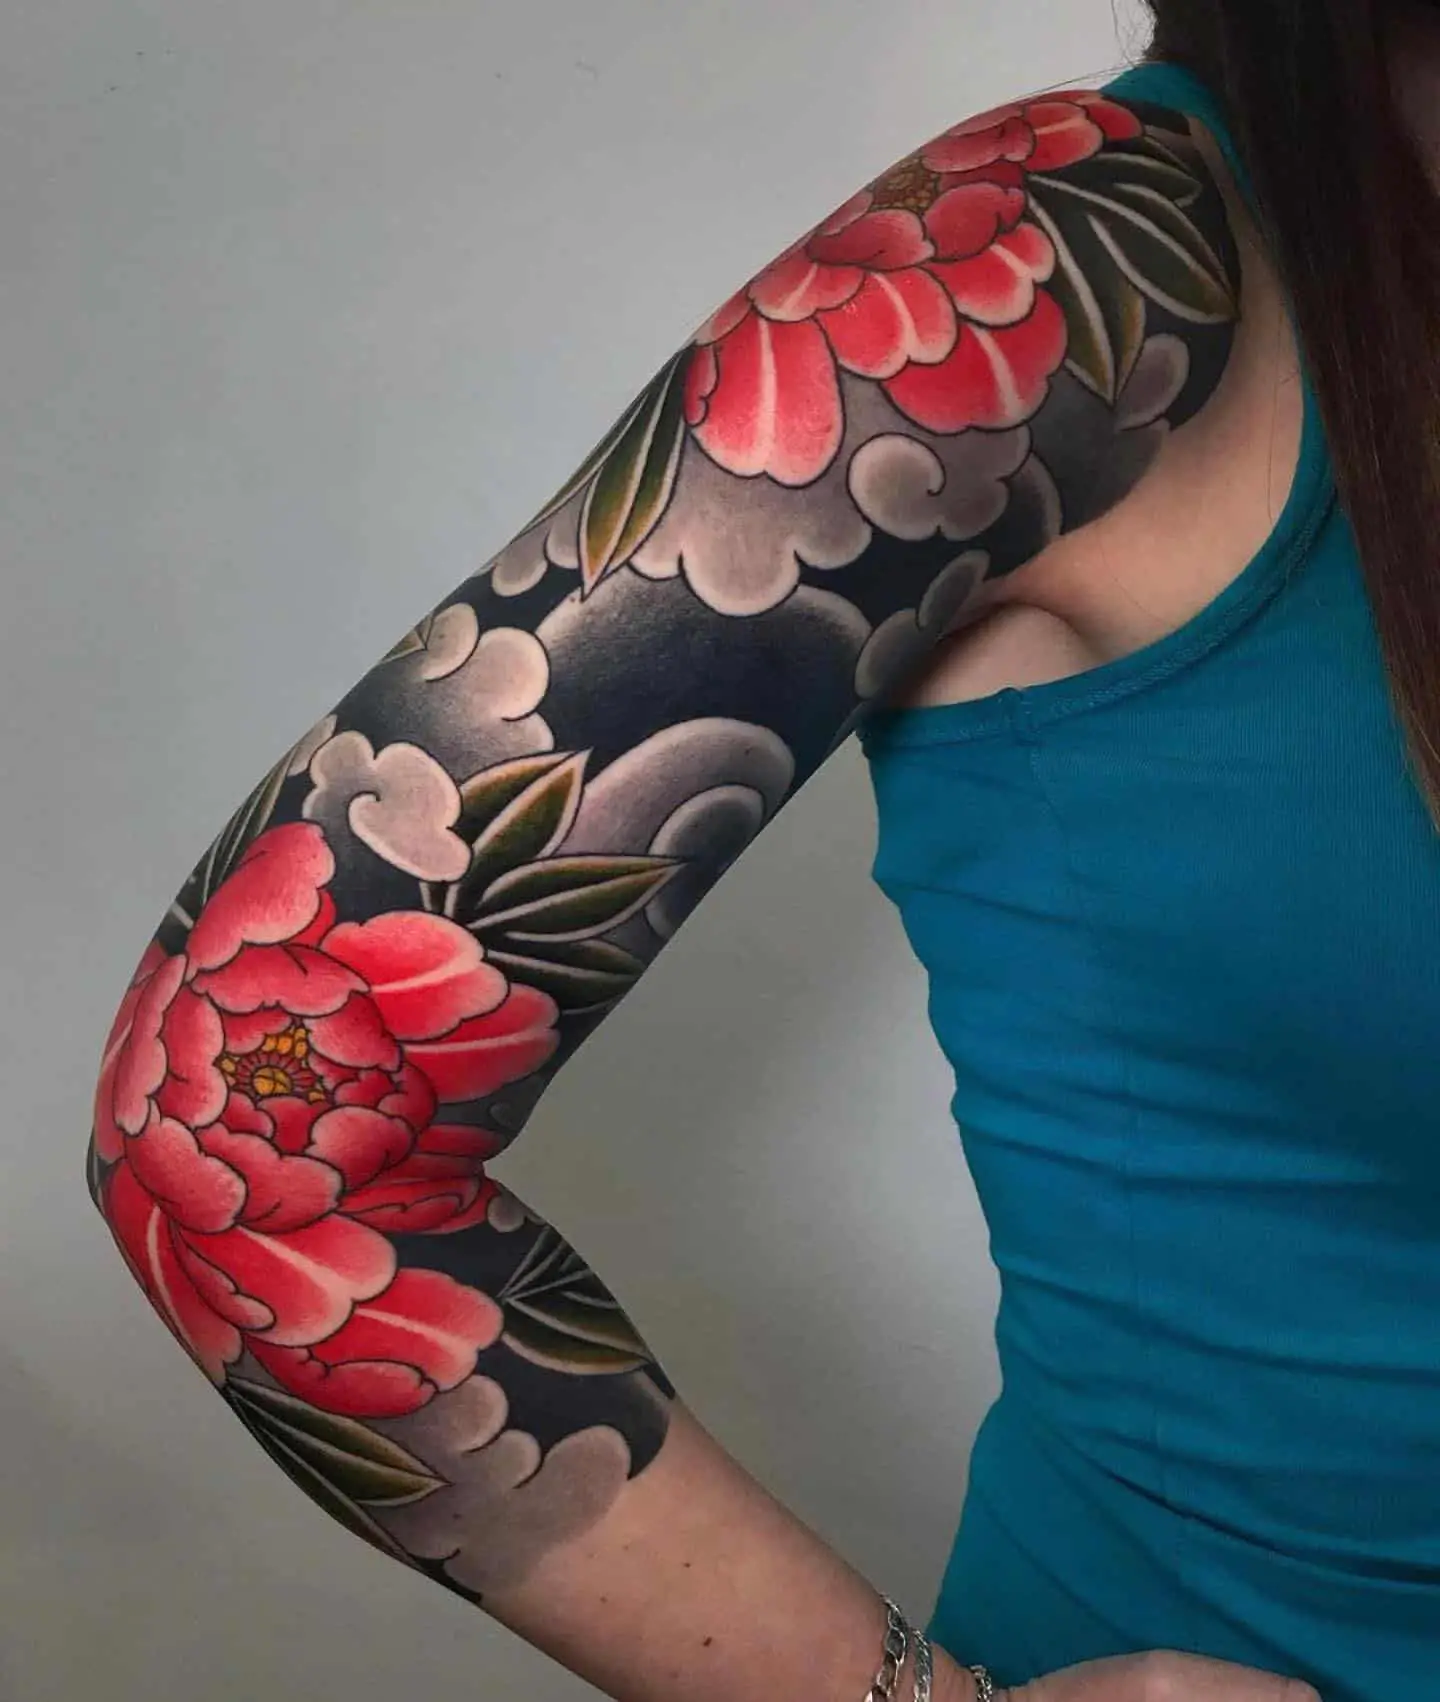 Japanese Flower Tattoo Meanings: A Complete Handbook on Japanese Flower Tattoo Designs and Their Significance.